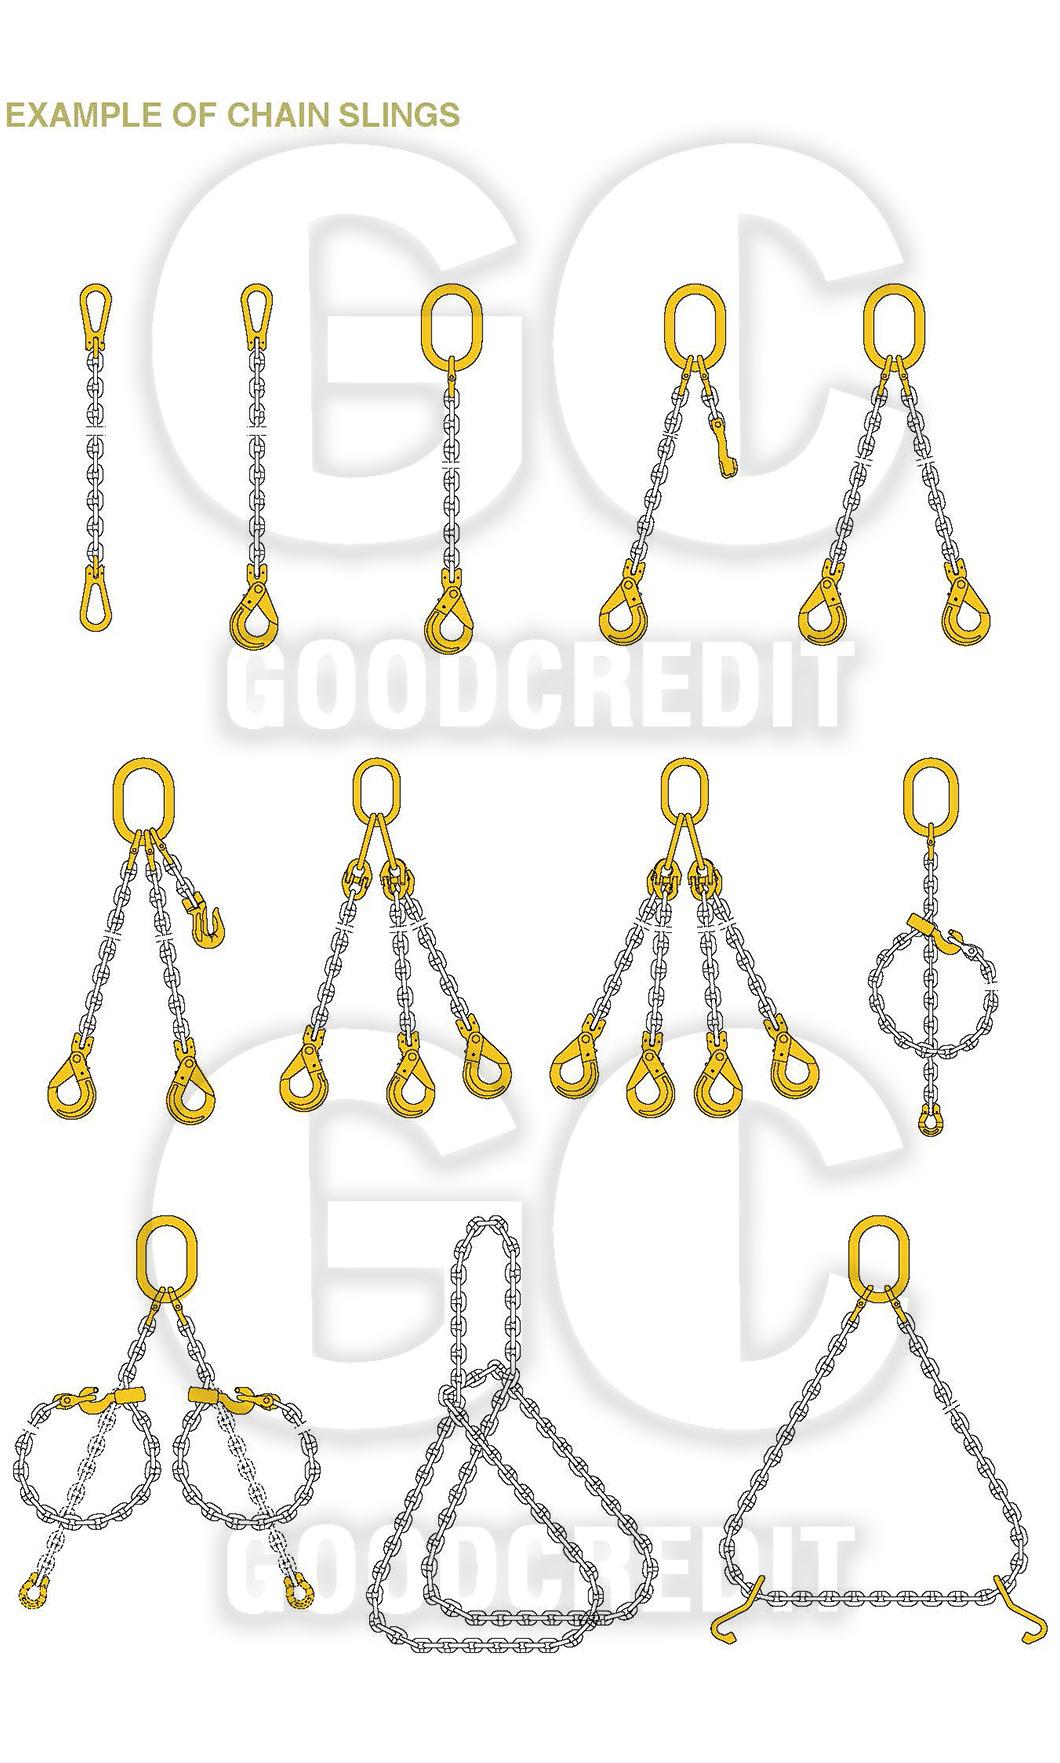 G70 G80 Alloy Binder Chain with Hook